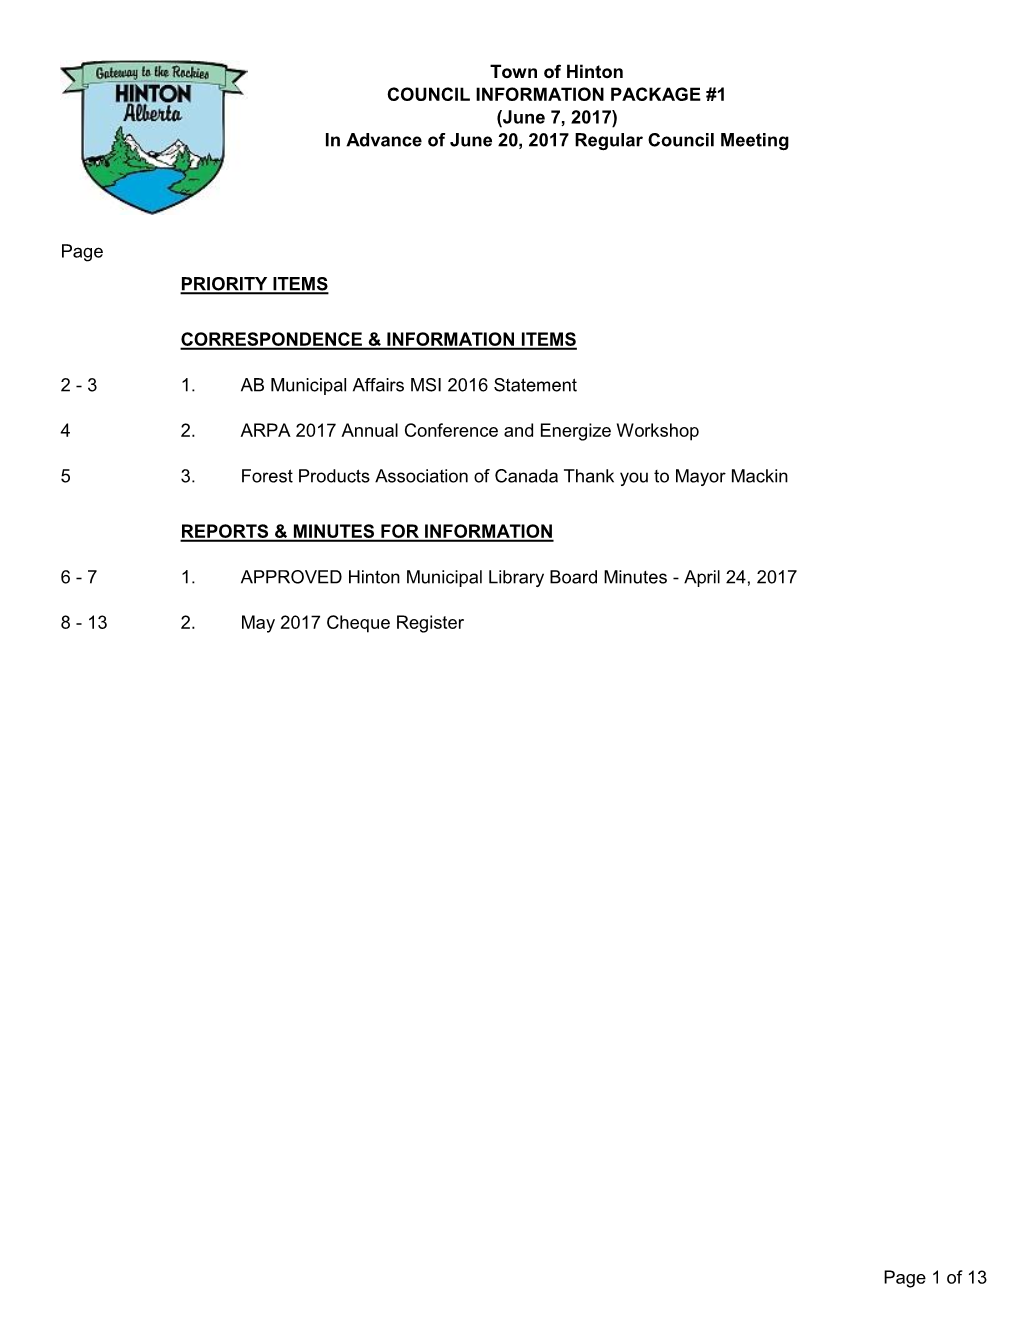 COUNCIL INFORMATION PACKAGE #1 (June 7, 2017) in Advance of June 20, 2017 Regular Council Meeting